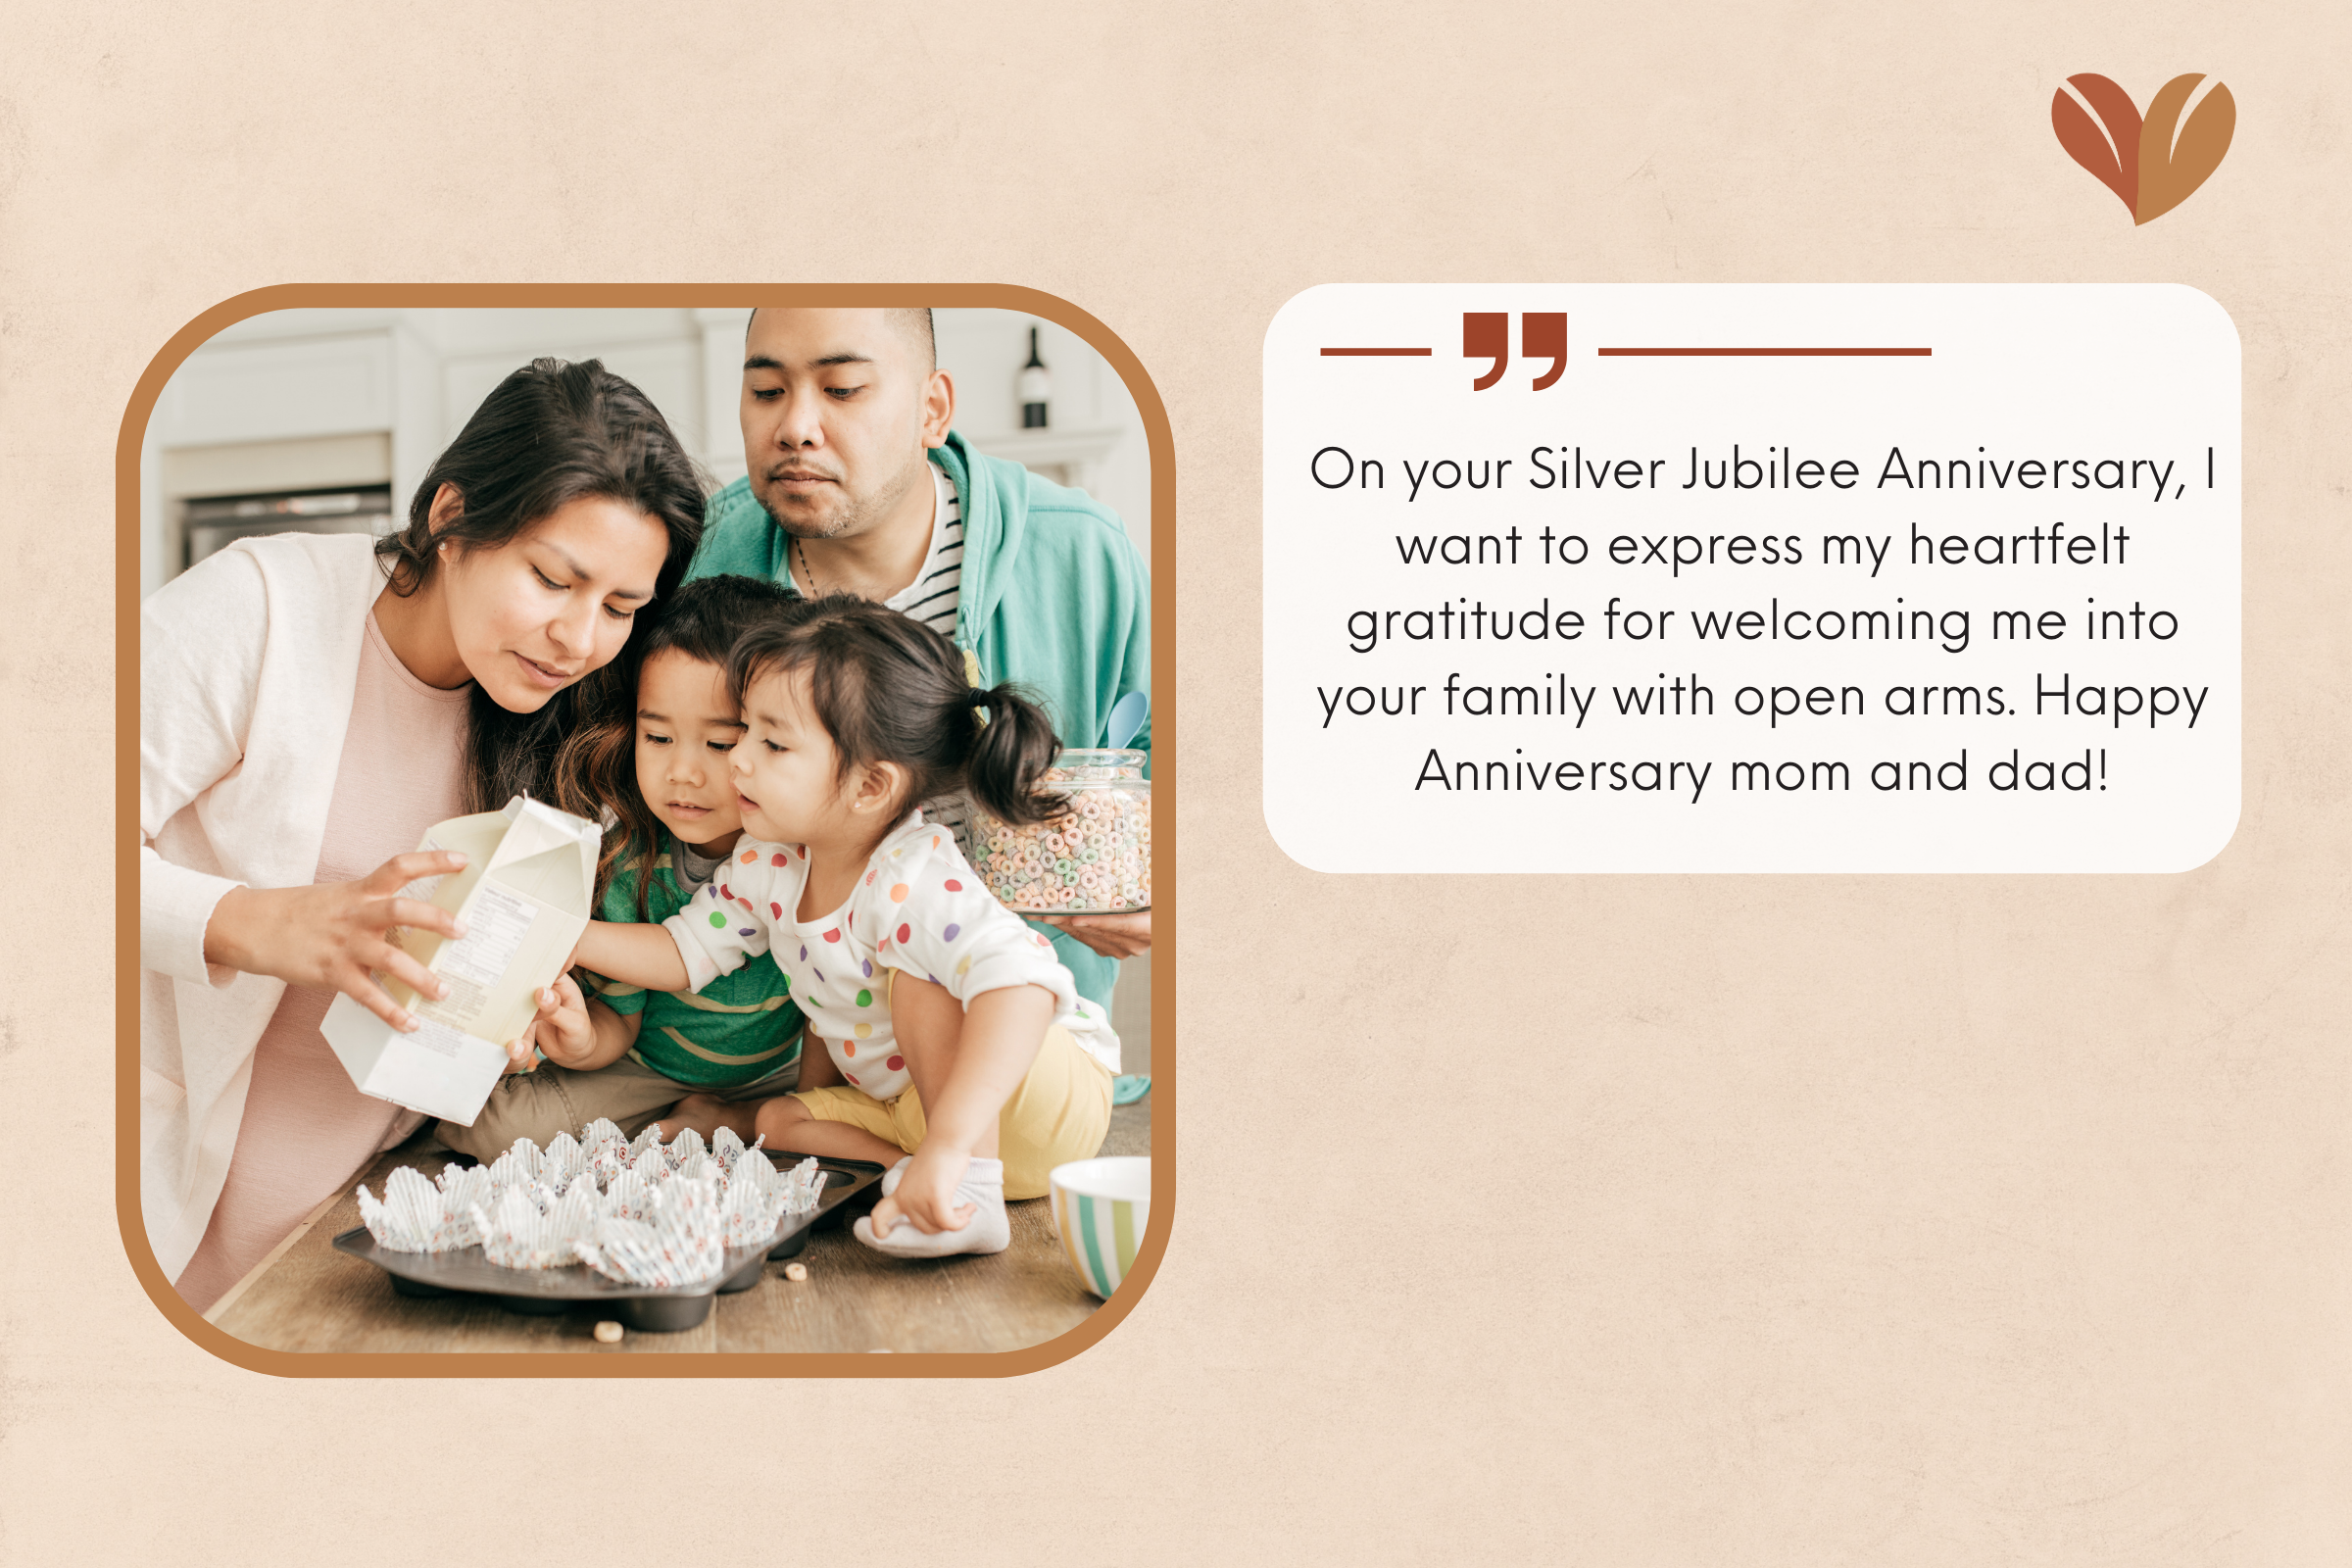 Touching messages for mom and dad on anniversary